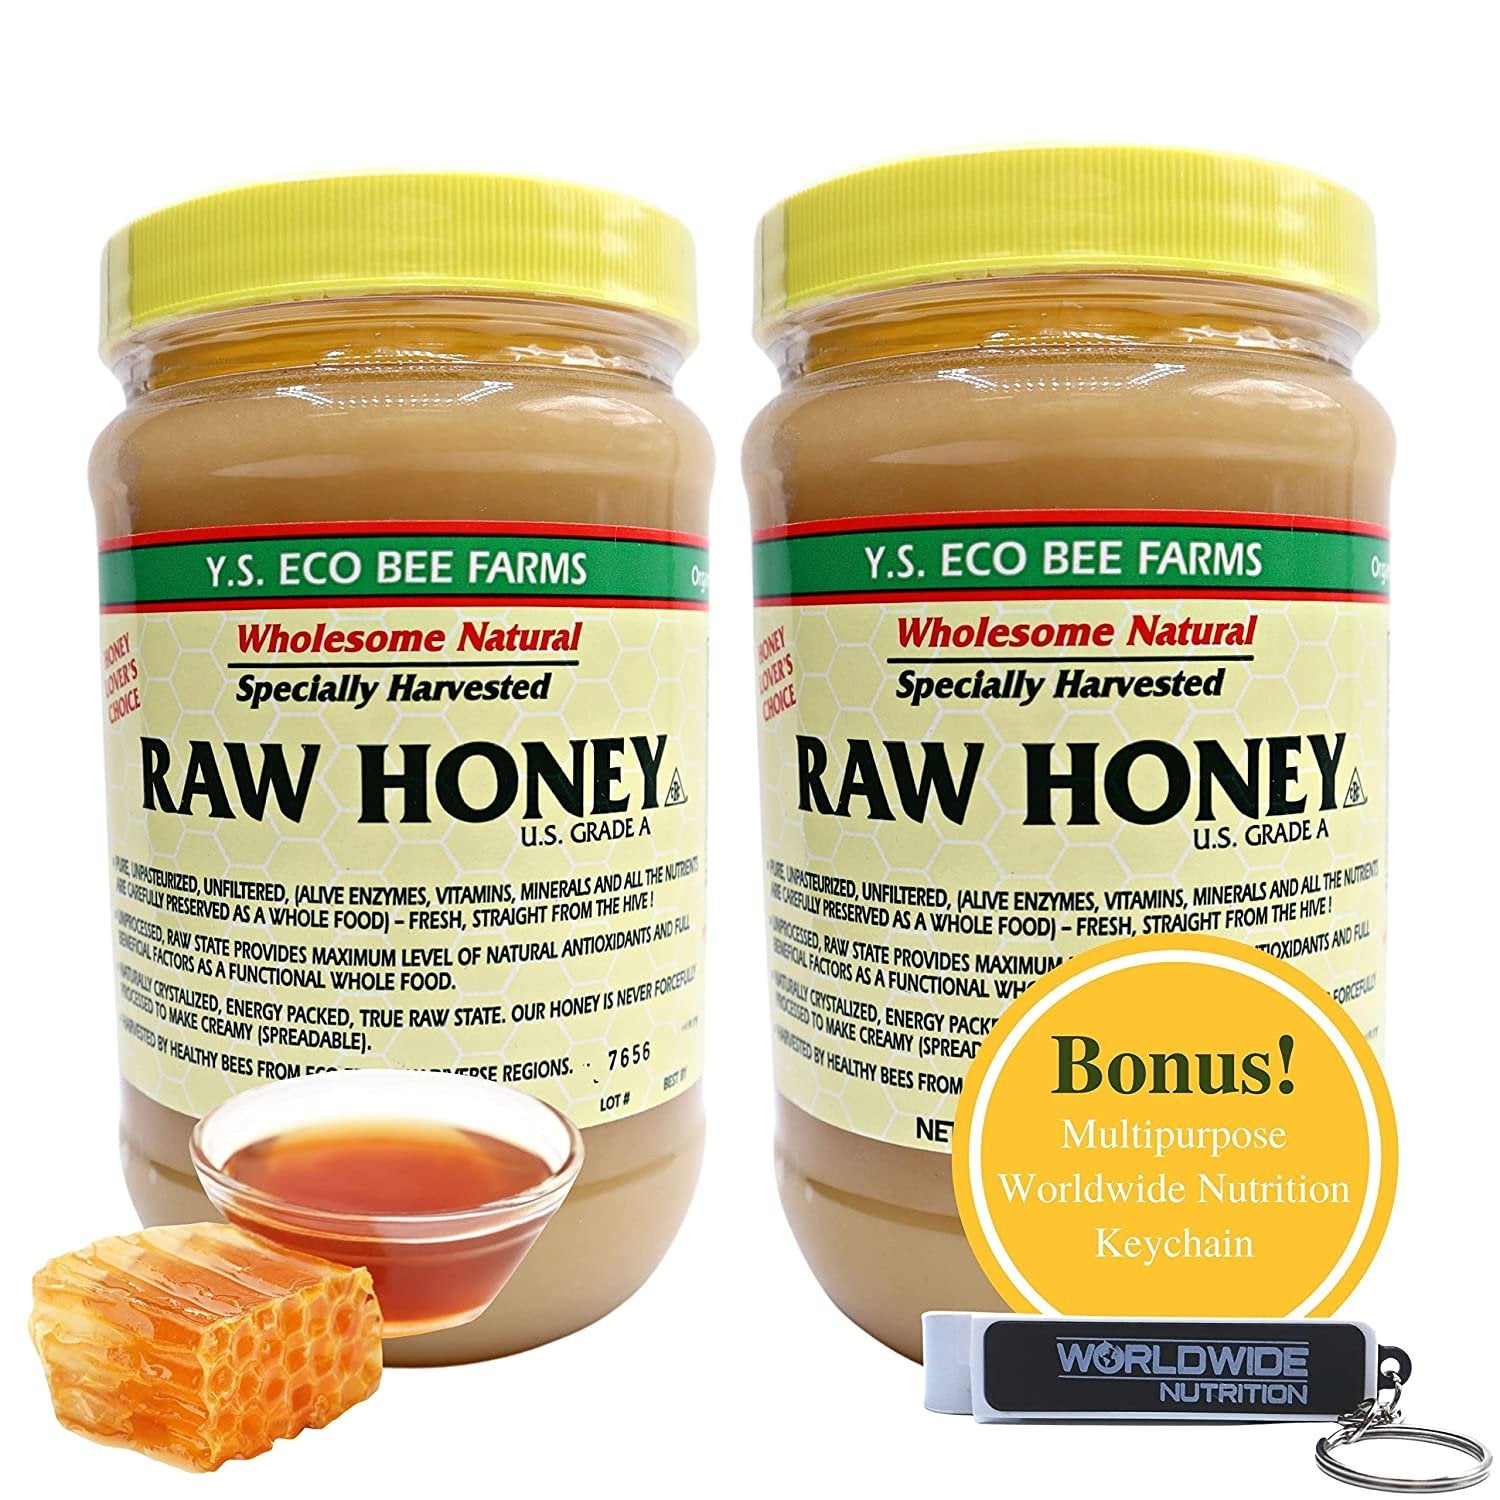 Y.S. Eco Bee Farms, Y.S. Organic Bee Farms, Wholesome Natural Raw Honey, Unpasteurized, Unfiltered, Fresh Raw State, Kosher, Pure, Natural, Healthy, Safe, Gluten Free, Specially Harvested, 22oz - 2pk